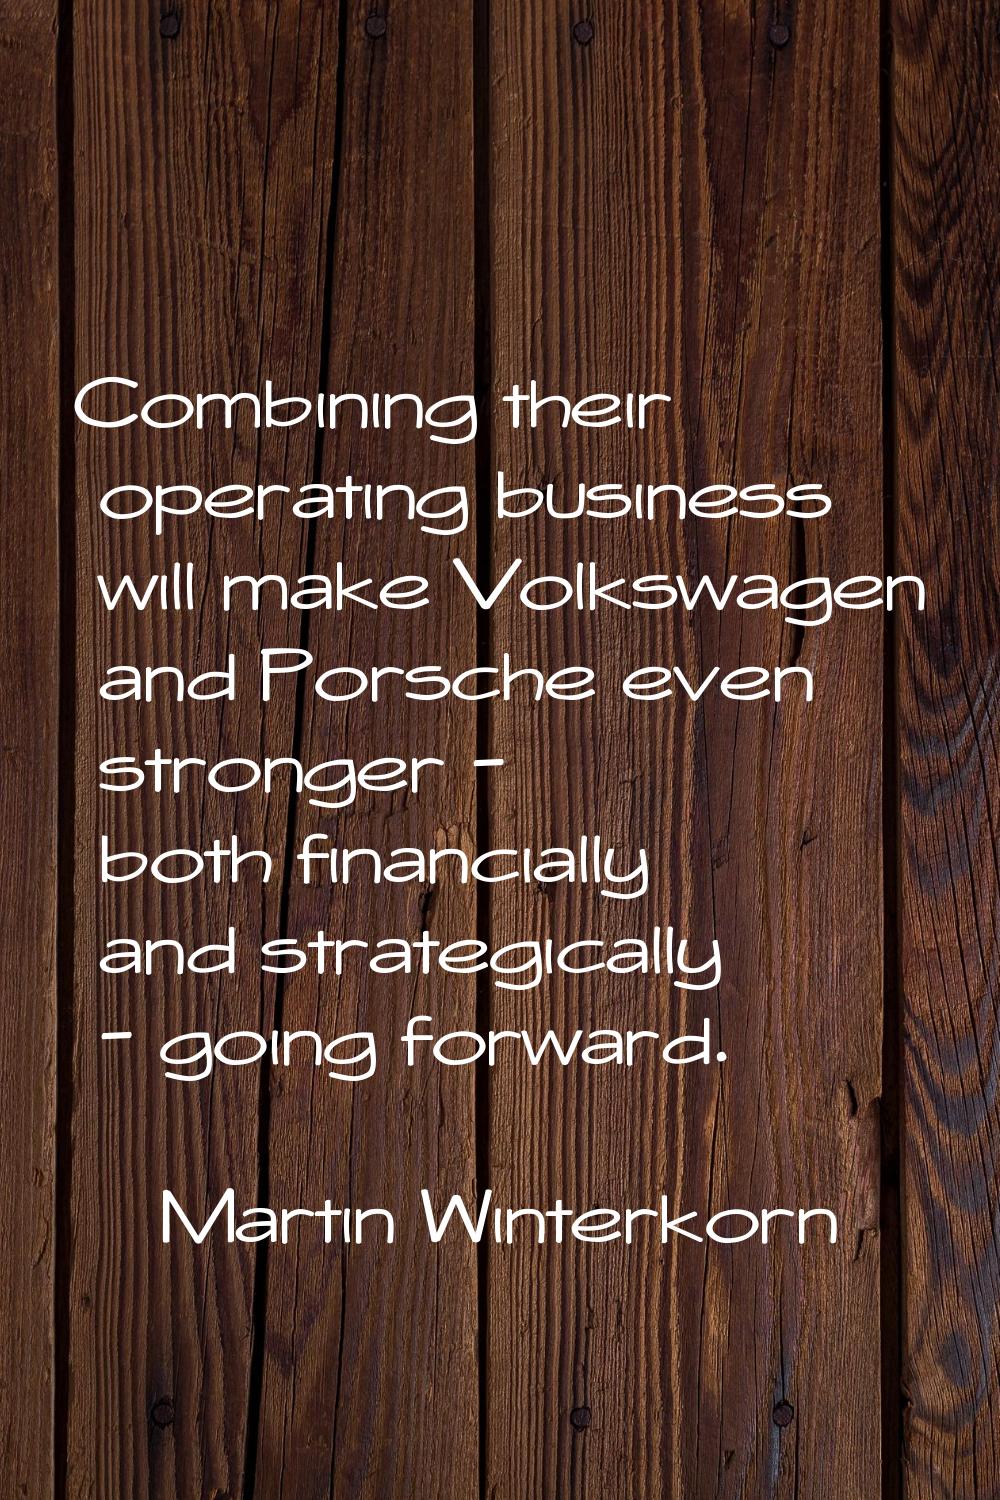 Combining their operating business will make Volkswagen and Porsche even stronger - both financiall